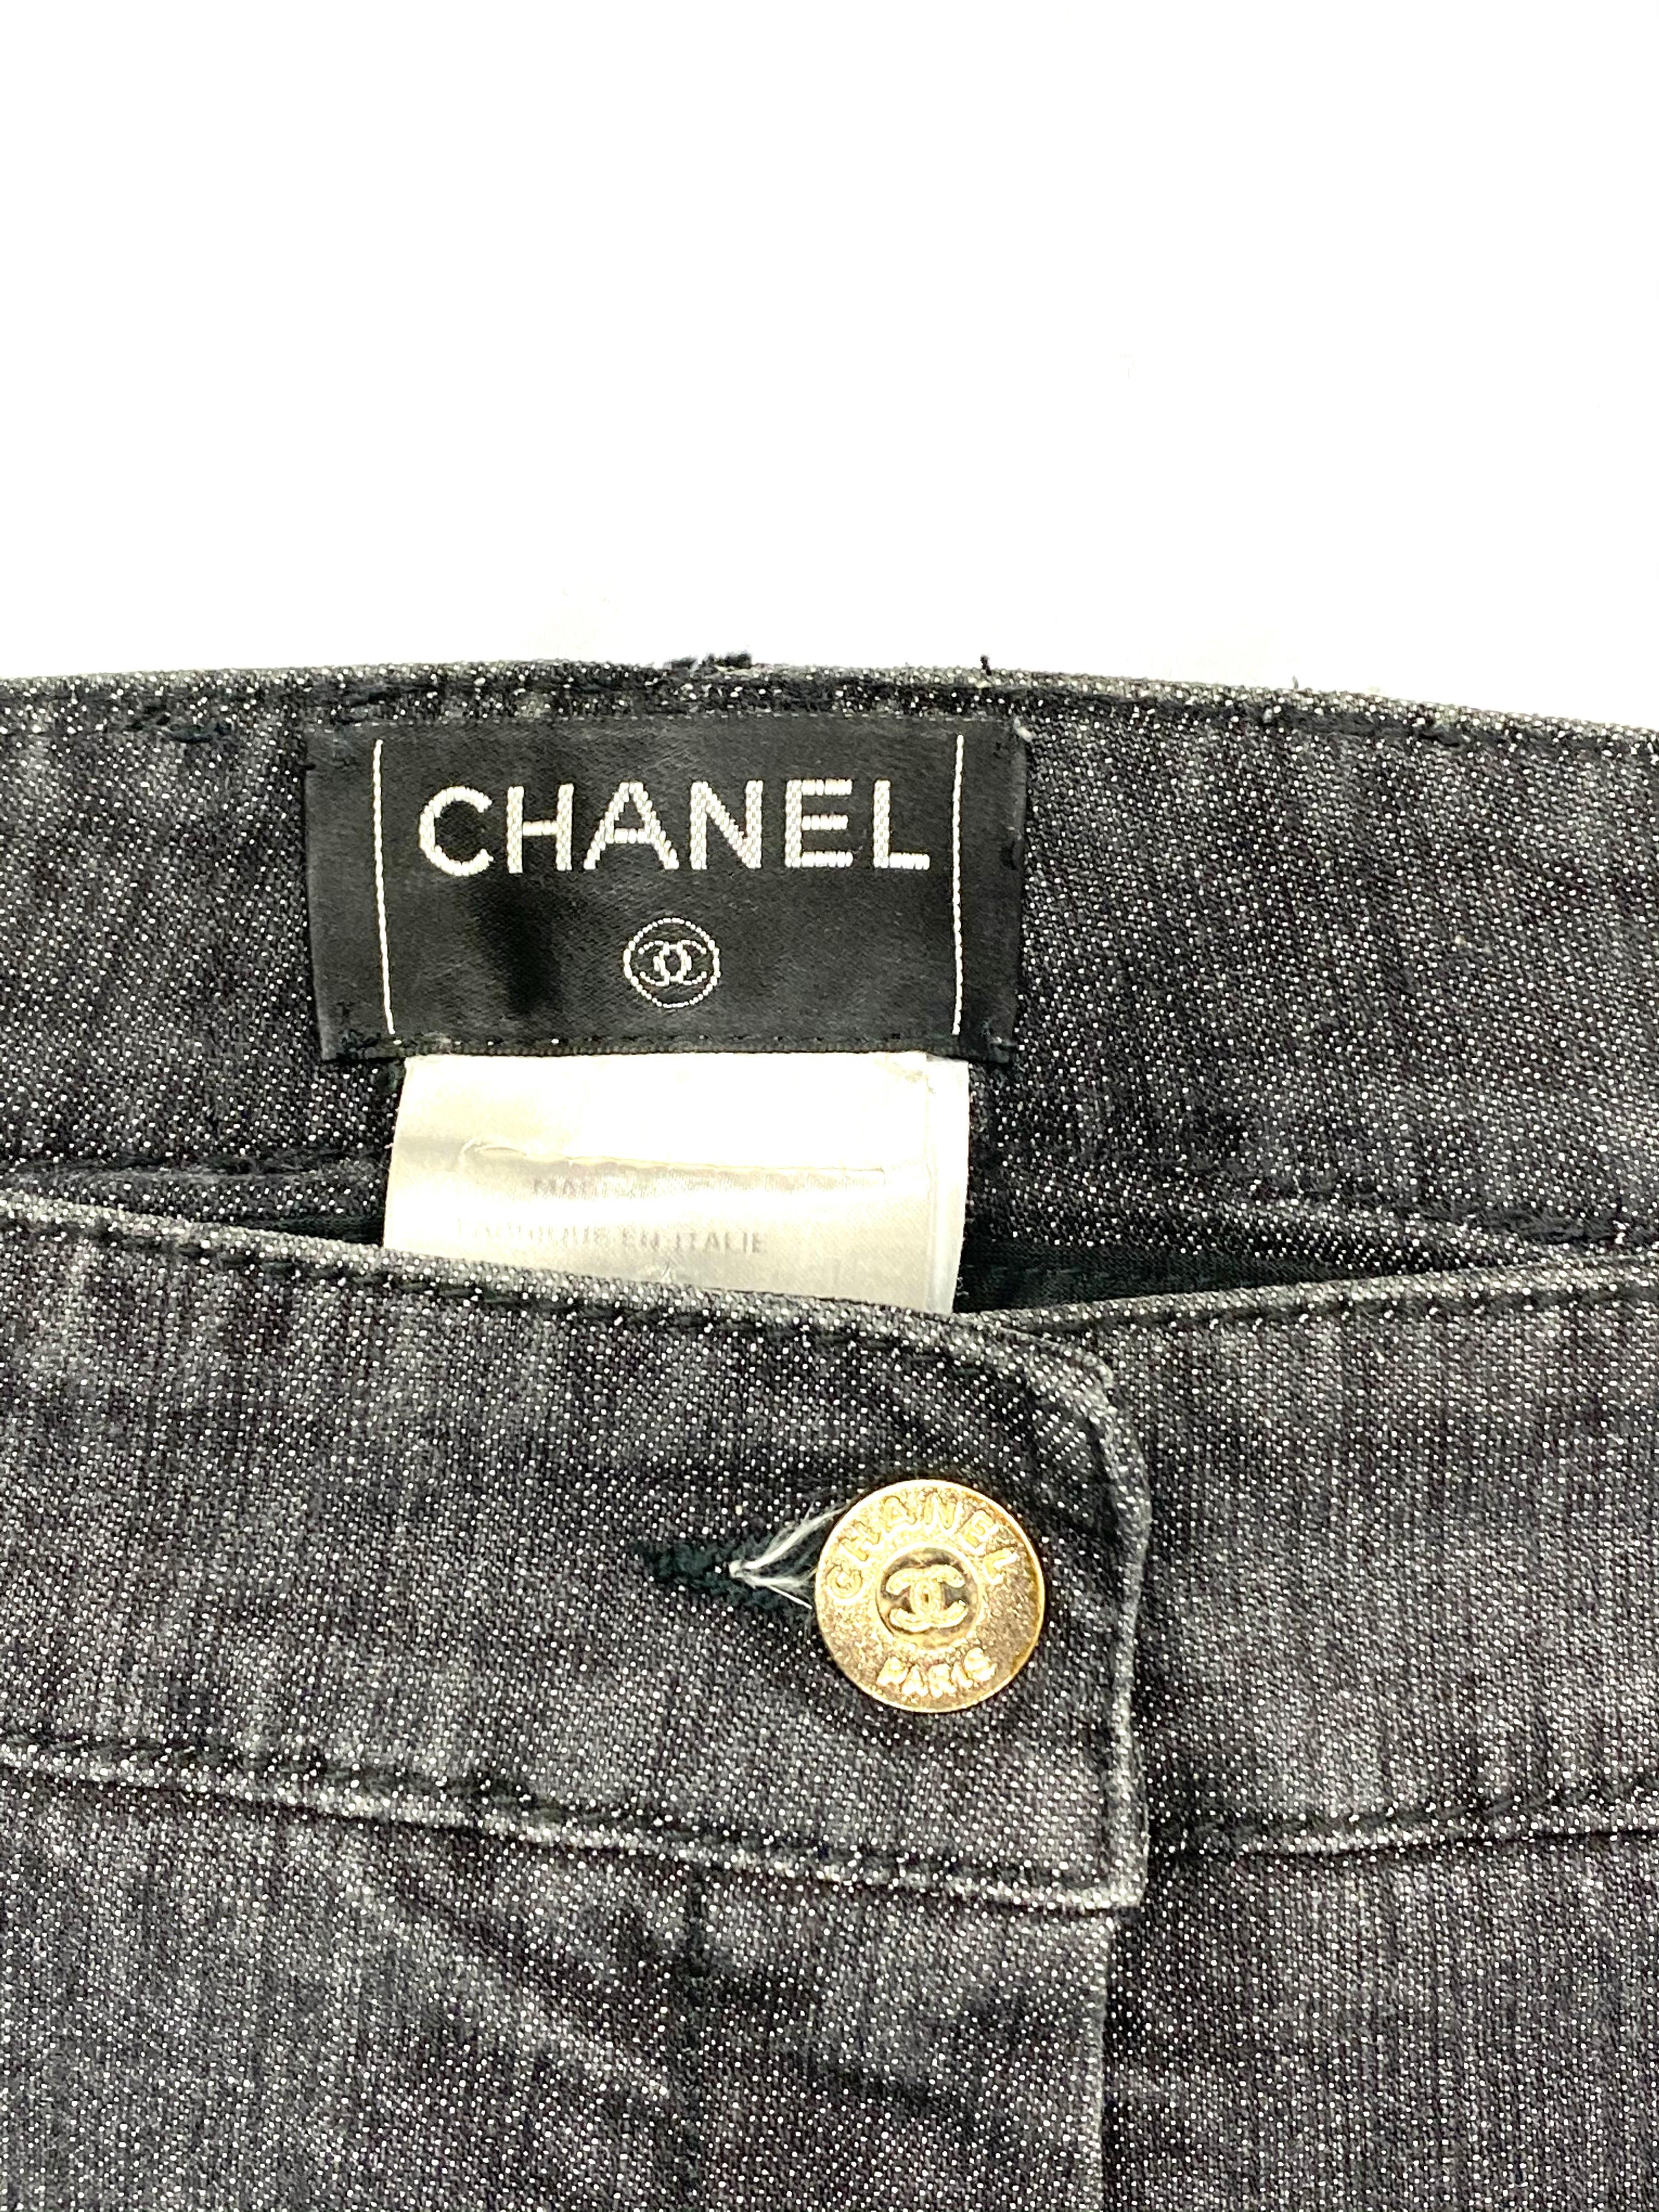 chanel jeans